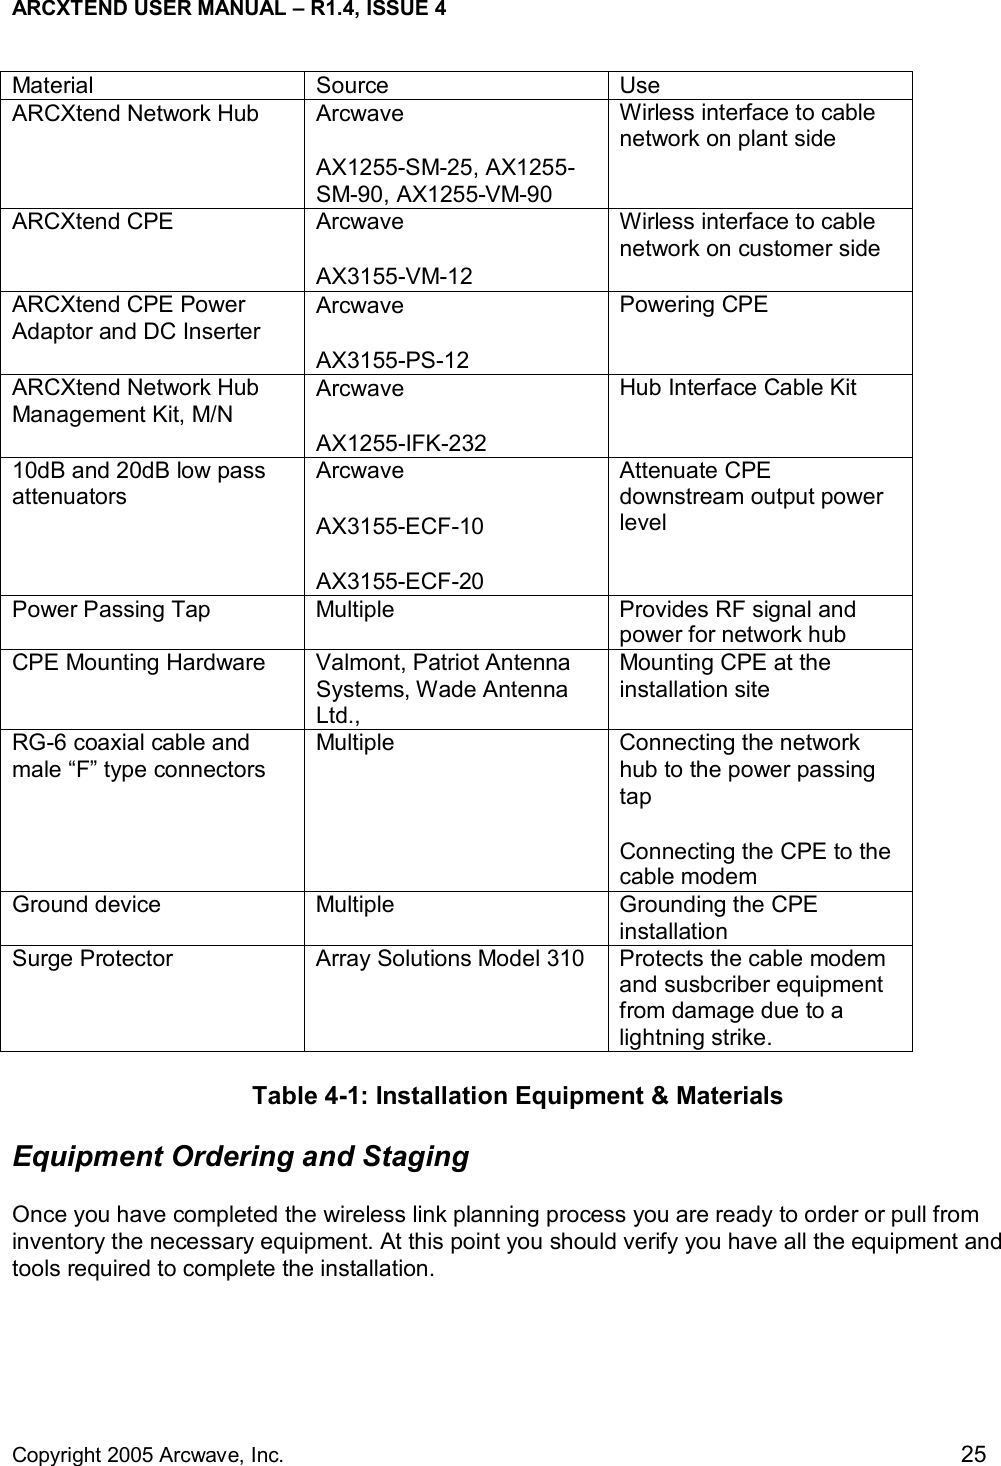 ARCXTEND USER MANUAL – R1.4, ISSUE 4  Copyright 2005 Arcwave, Inc.    25 Material Source  Use ARCXtend Network Hub  Arcwave  AX1255-SM-25, AX1255-SM-90, AX1255-VM-90 Wirless interface to cable network on plant side ARCXtend CPE  Arcwave  AX3155-VM-12 Wirless interface to cable network on customer side ARCXtend CPE Power Adaptor and DC Inserter Arcwave  AX3155-PS-12 Powering CPE ARCXtend Network Hub Management Kit, M/N Arcwave AX1255-IFK-232 Hub Interface Cable Kit 10dB and 20dB low pass attenuators  Arcwave AX3155-ECF-10 AX3155-ECF-20 Attenuate CPE downstream output power level  Power Passing Tap  Multiple  Provides RF signal and power for network hub CPE Mounting Hardware  Valmont, Patriot Antenna Systems, Wade Antenna Ltd.,  Mounting CPE at the installation site RG-6 coaxial cable and male “F” type connectors Multiple  Connecting the network hub to the power passing tap Connecting the CPE to the cable modem Ground device  Multiple  Grounding the CPE installation Surge Protector  Array Solutions Model 310  Protects the cable modem and susbcriber equipment from damage due to a lightning strike. Table 4-1: Installation Equipment &amp; Materials Equipment Ordering and Staging  Once you have completed the wireless link planning process you are ready to order or pull from inventory the necessary equipment. At this point you should verify you have all the equipment and tools required to complete the installation. 